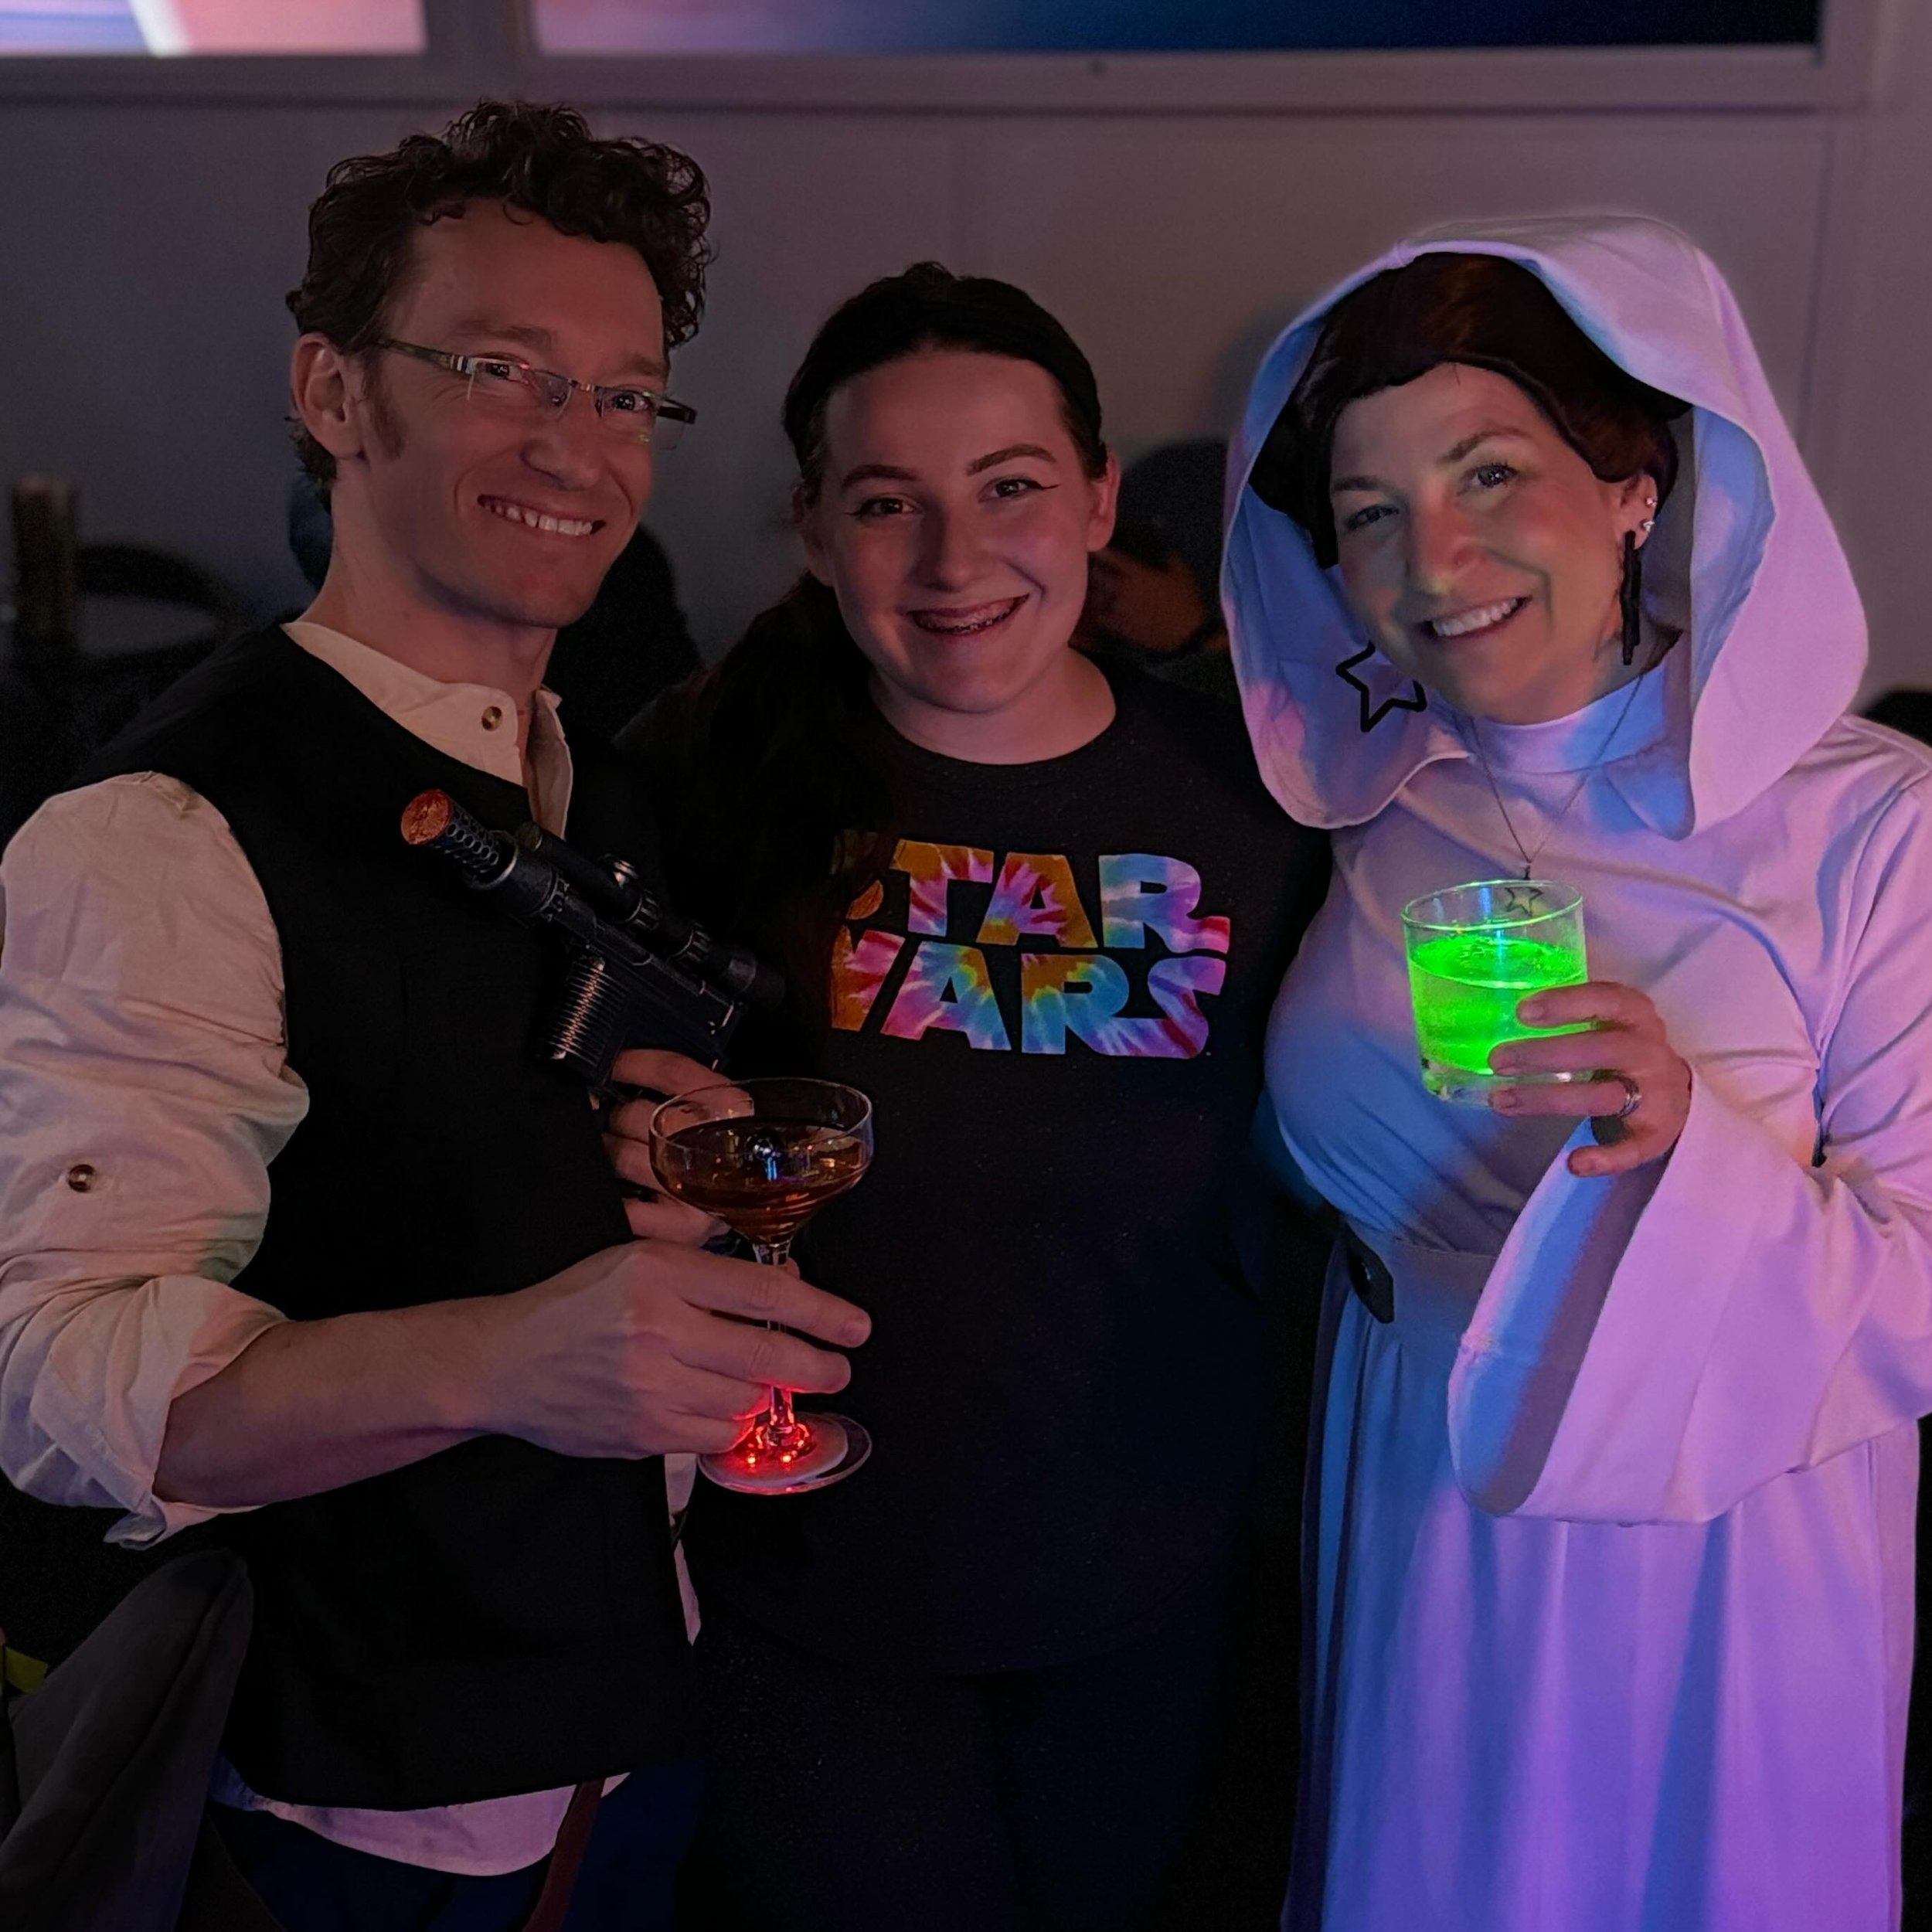 This Saturday is May the Fourth (be with you)! Come join or enjoy the costume contest, we have a special DJ in the house, and you can signal whether you&rsquo;re with the Jedi or the Dark Side with your choice of the &ldquo;Tart-ooine Sour&rdquo; or 